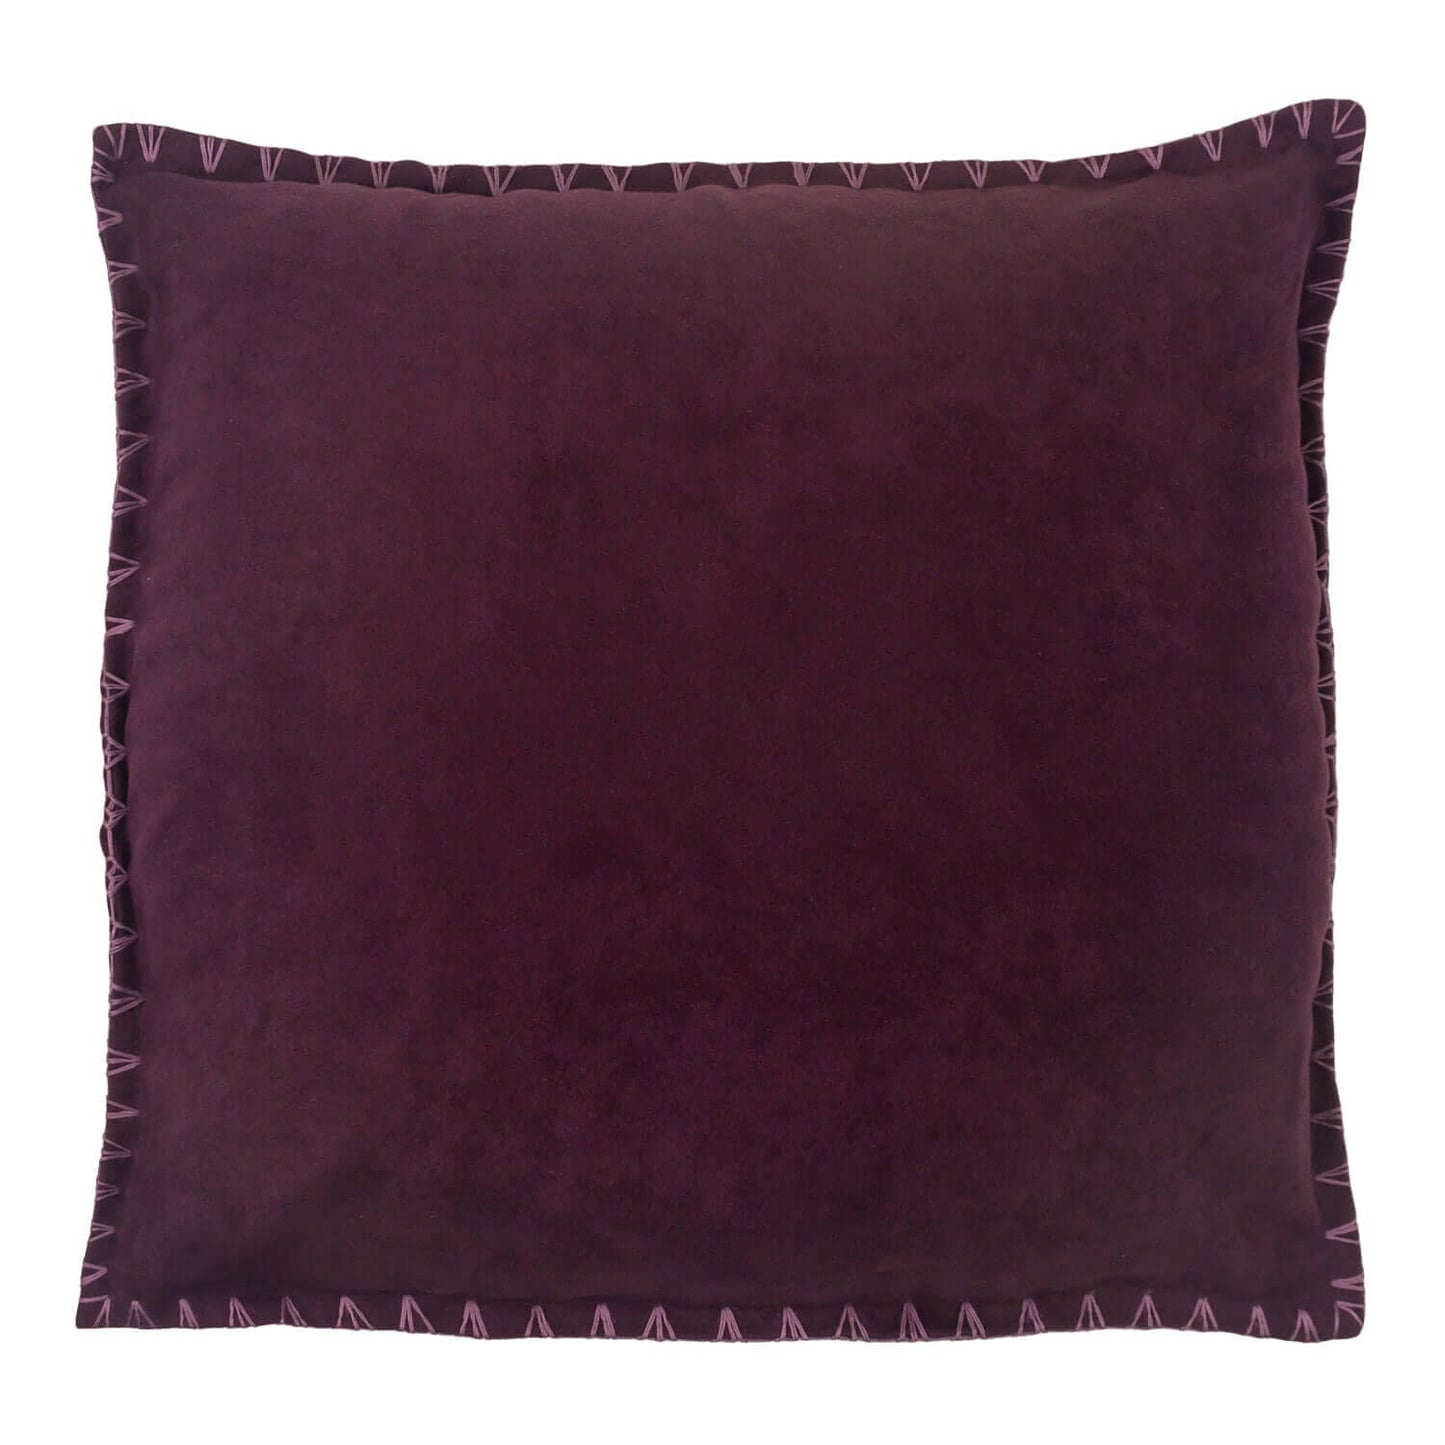 Suede Cushion Cover (4 pack)